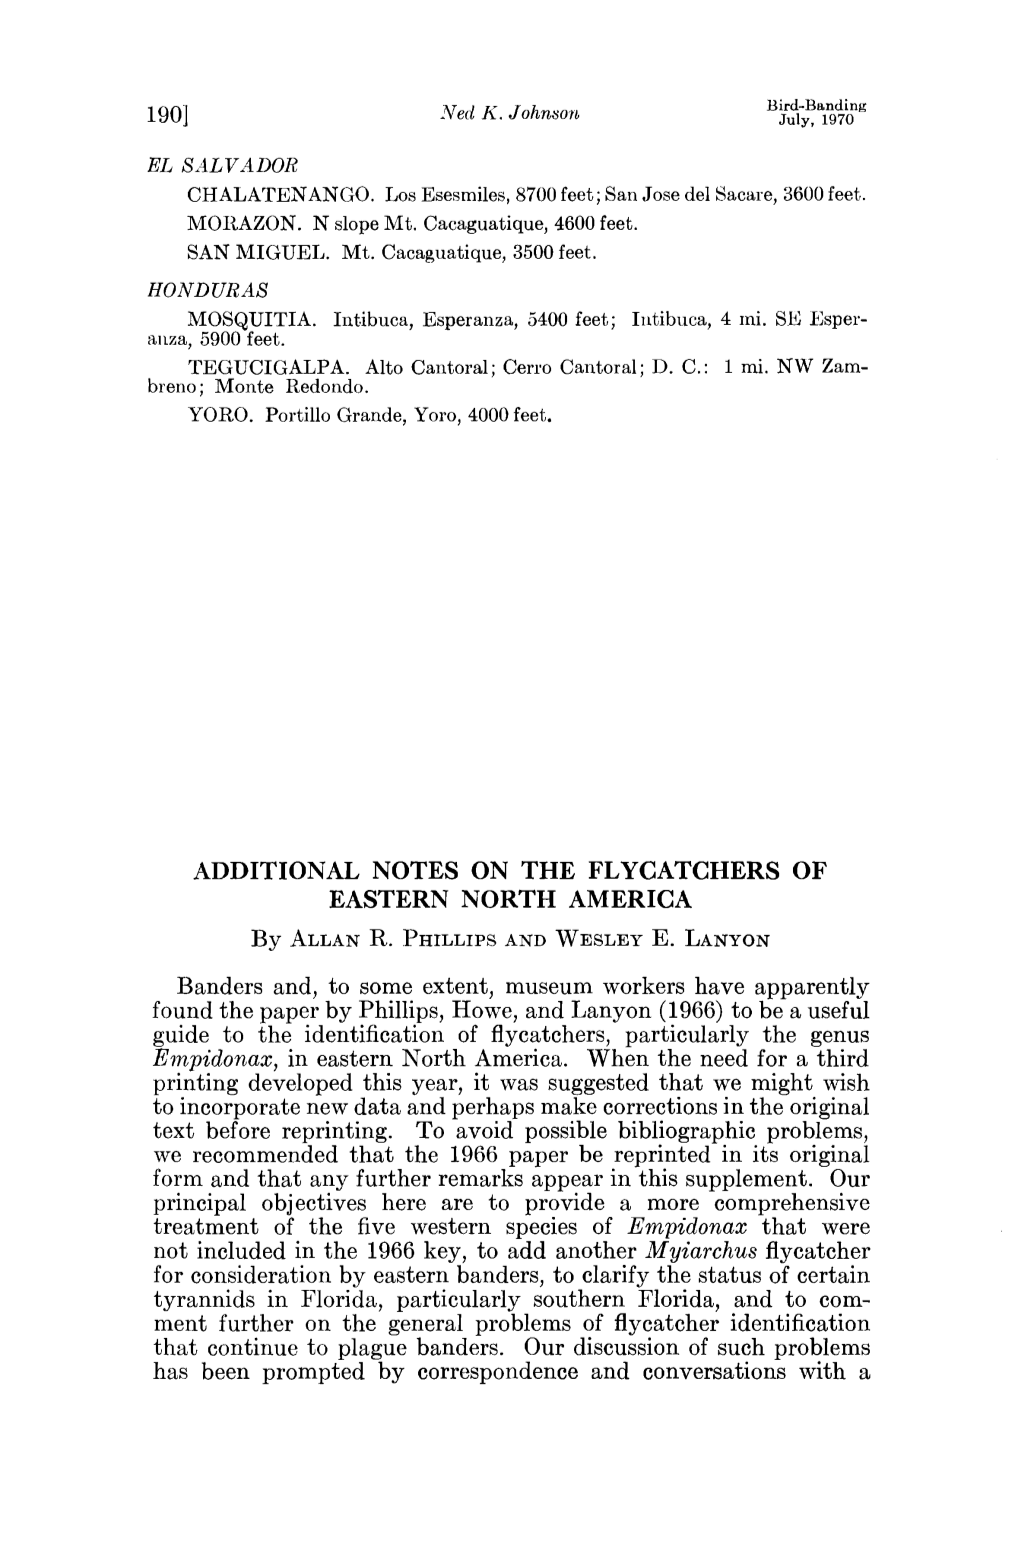 ADDITIONAL NOTES on the FLYCATCHERS of EASTERN NORTH AMERICA by ALLAN R